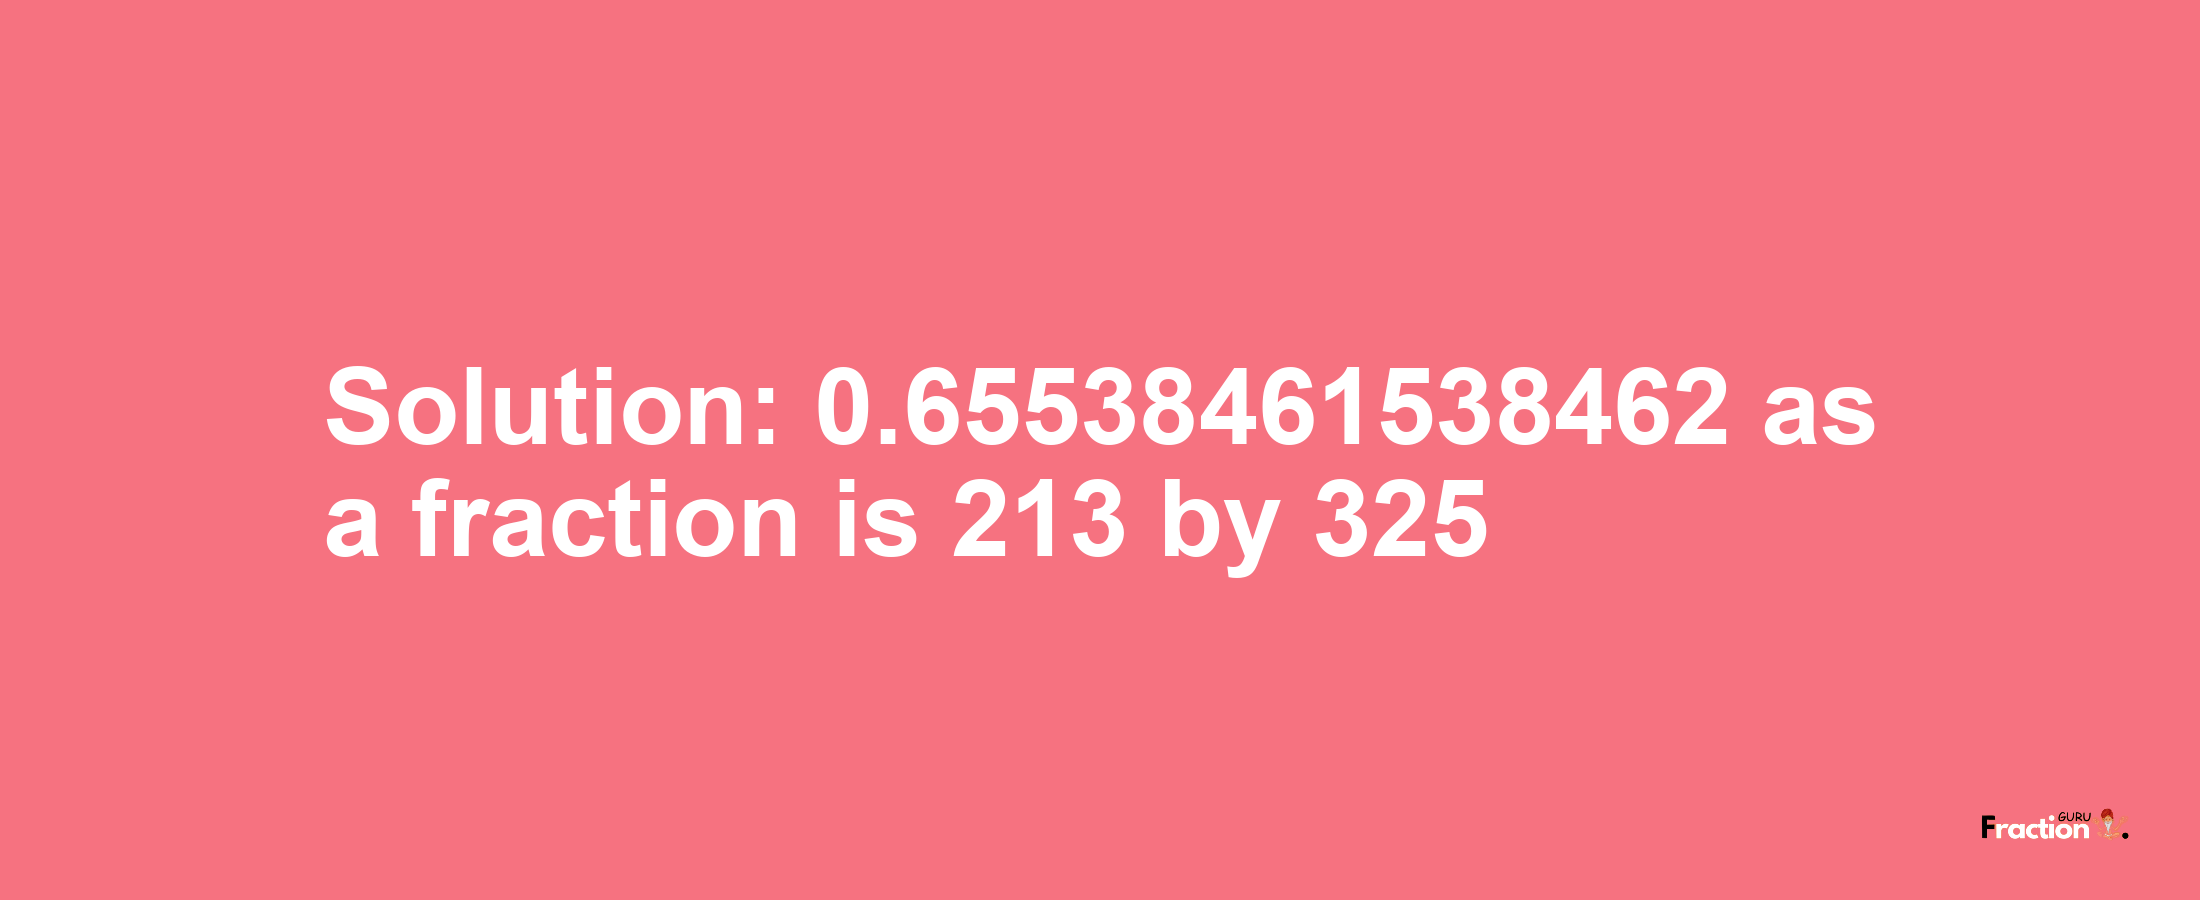 Solution:0.65538461538462 as a fraction is 213/325